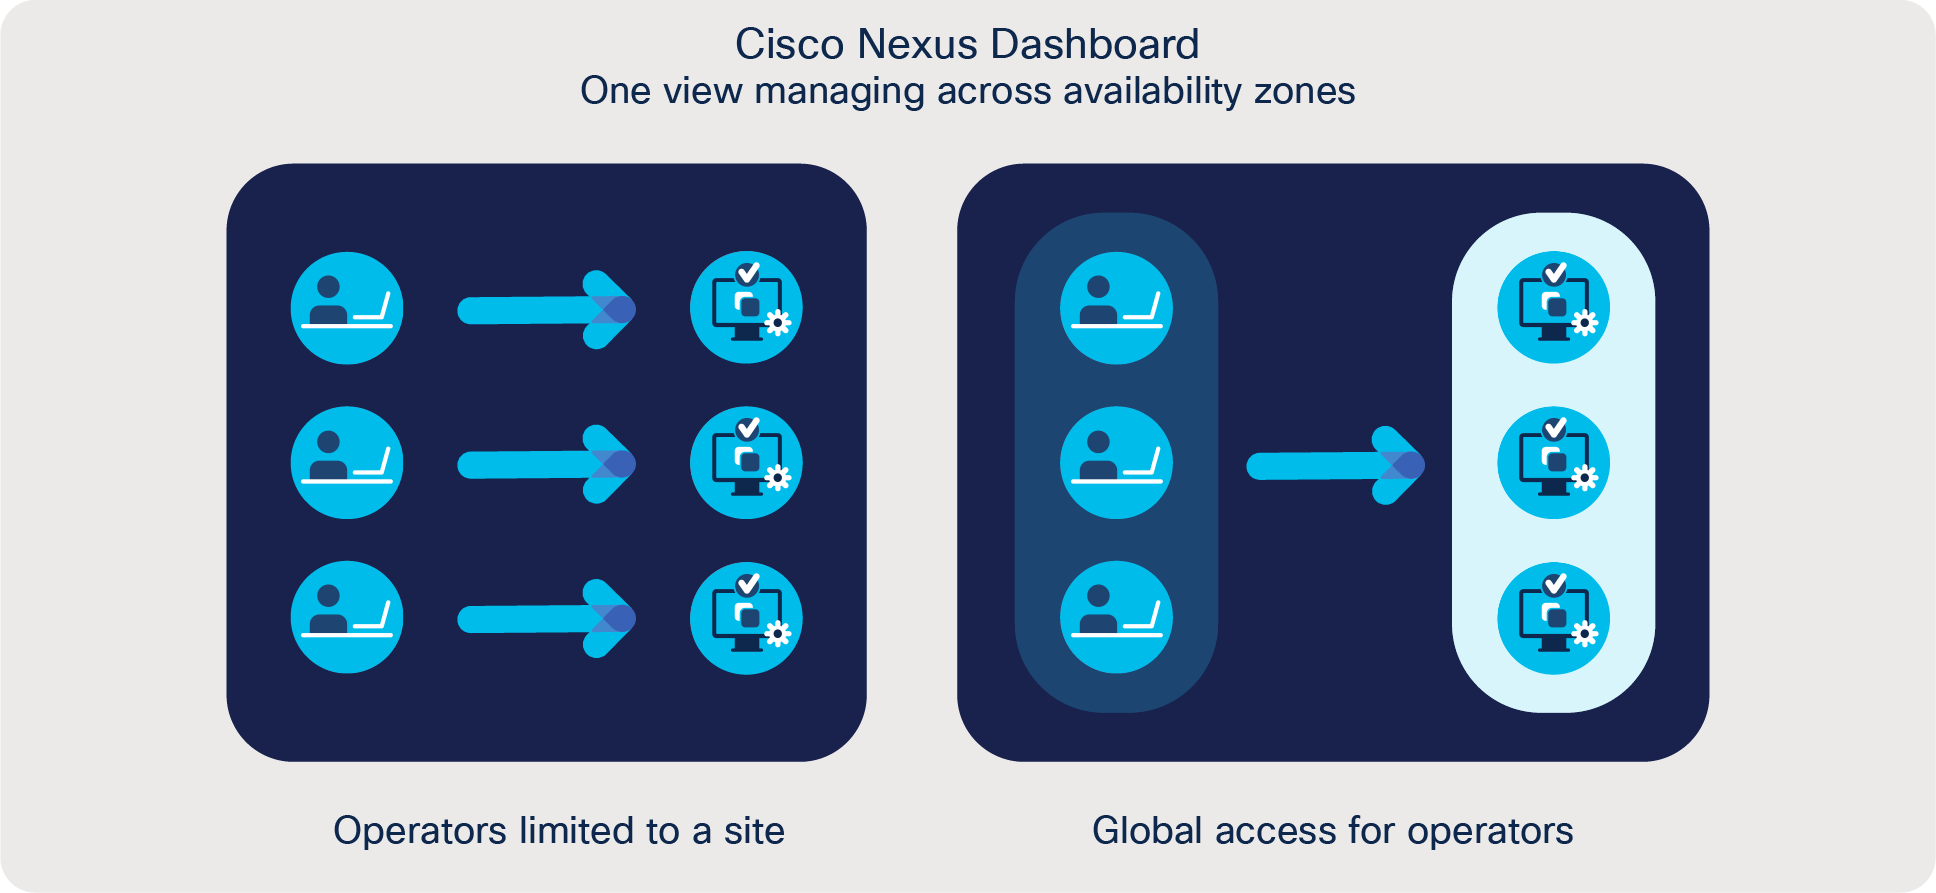 Cisco Nexus Dashboard integrated services give NetOps command and control over global network fabrics